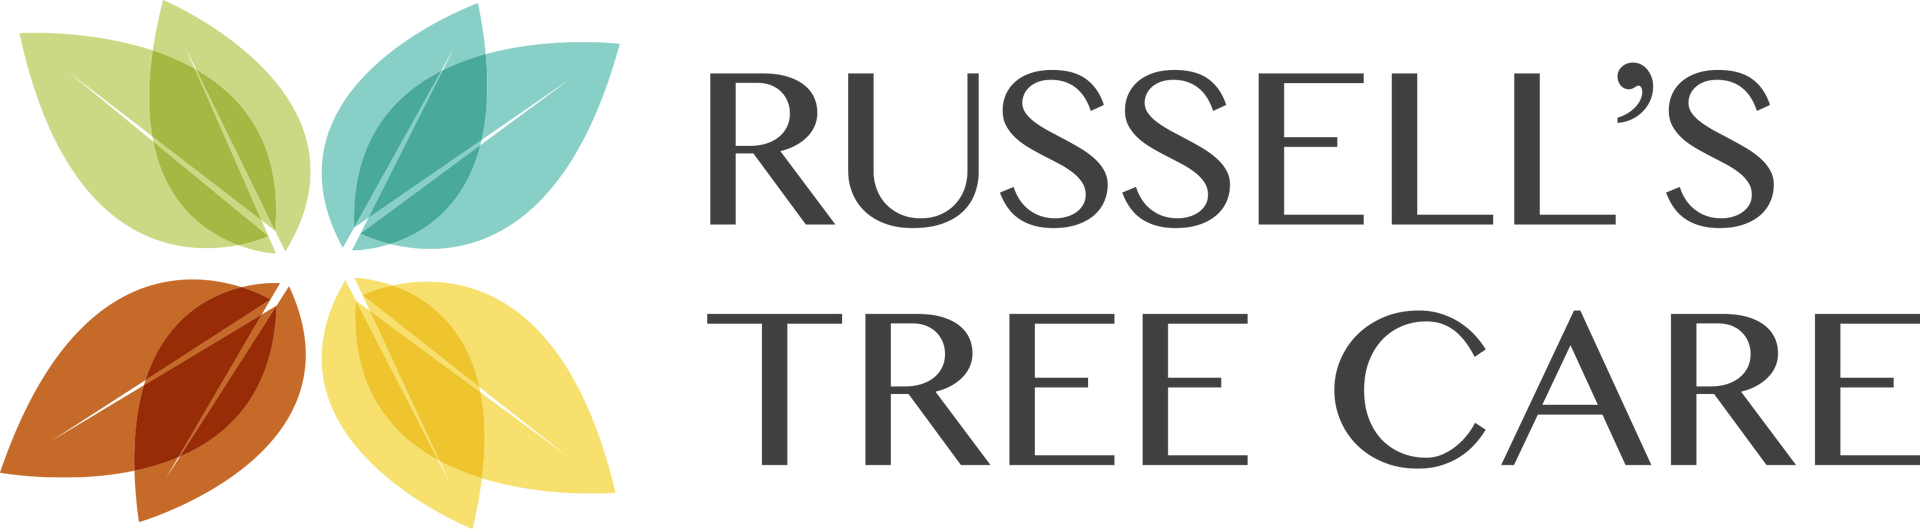 Russell's Tree Care Services  Inc. - LOGO